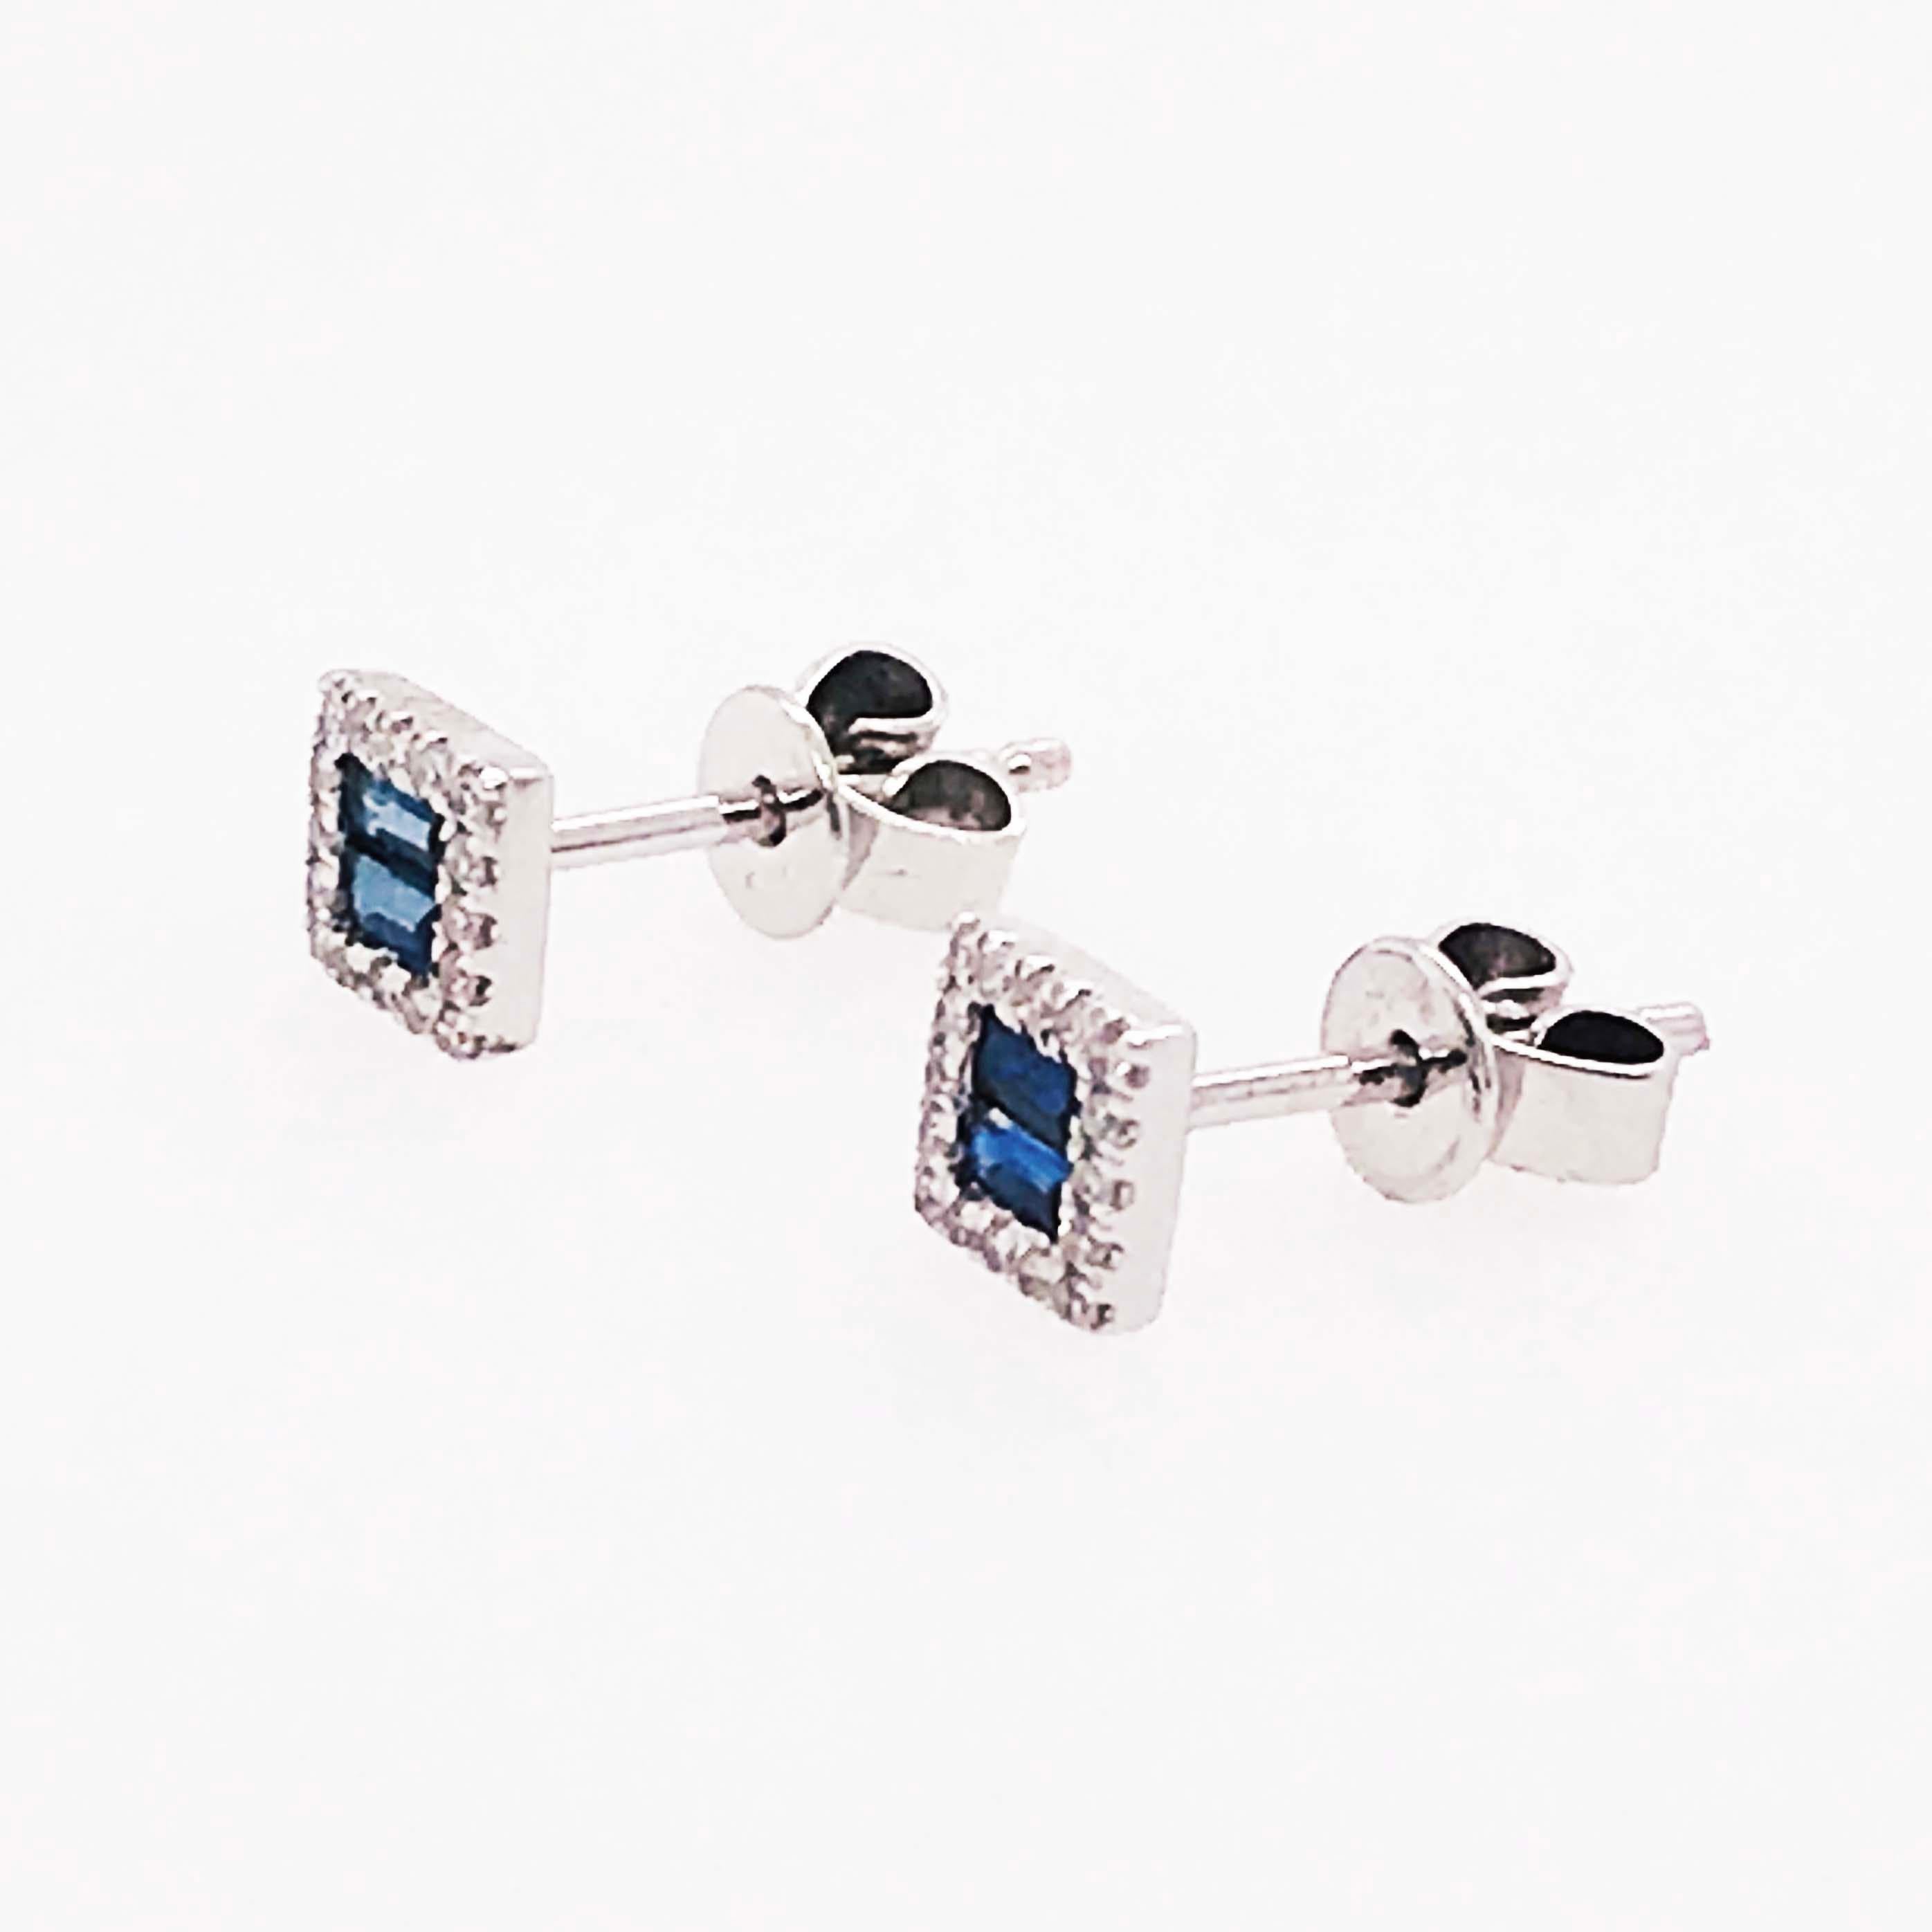 Baguette Cut Blue Sapphire and Diamond Earrings, Square Sapphire Studs with Diamond Halo